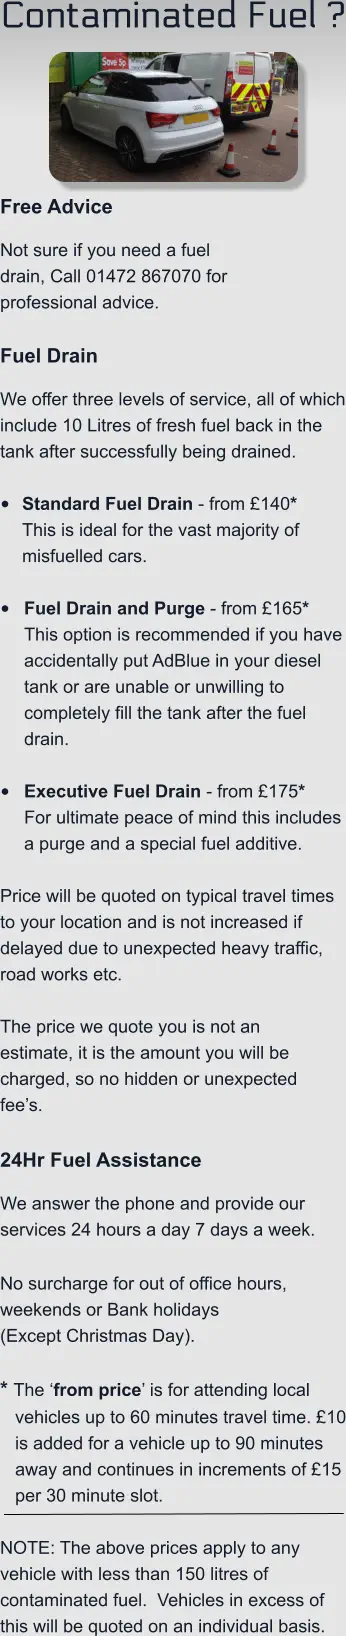 Contaminated Fuel ?    Free Advice Not sure if you need a fuel drain, Call 01472 867070 for professional advice.  Fuel Drain We offer three levels of service, all of which include 10 Litres of fresh fuel back in the tank after successfully being drained.  •	Standard Fuel Drain - from £140*This is ideal for the vast majority of misfuelled cars.  •	Fuel Drain and Purge - from £165*This option is recommended if you have accidentally put AdBlue in your diesel tank or are unable or unwilling to completely fill the tank after the fuel drain. •	Executive Fuel Drain - from £175*For ultimate peace of mind this includes a purge and a special fuel additive.  Price will be quoted on typical travel times to your location and is not increased if delayed due to unexpected heavy traffic, road works etc.    The price we quote you is not an estimate, it is the amount you will be charged, so no hidden or unexpected fee’s.  24Hr Fuel Assistance We answer the phone and provide our services 24 hours a day 7 days a week.    No surcharge for out of office hours, weekends or Bank holidays  (Except Christmas Day).  * The ‘from price’ is for attending local vehicles up to 60 minutes travel time. £10 is added for a vehicle up to 90 minutes away and continues in increments of £15 per 30 minute slot.  NOTE: The above prices apply to any vehicle with less than 150 litres of contaminated fuel.  Vehicles in excess of this will be quoted on an individual basis.